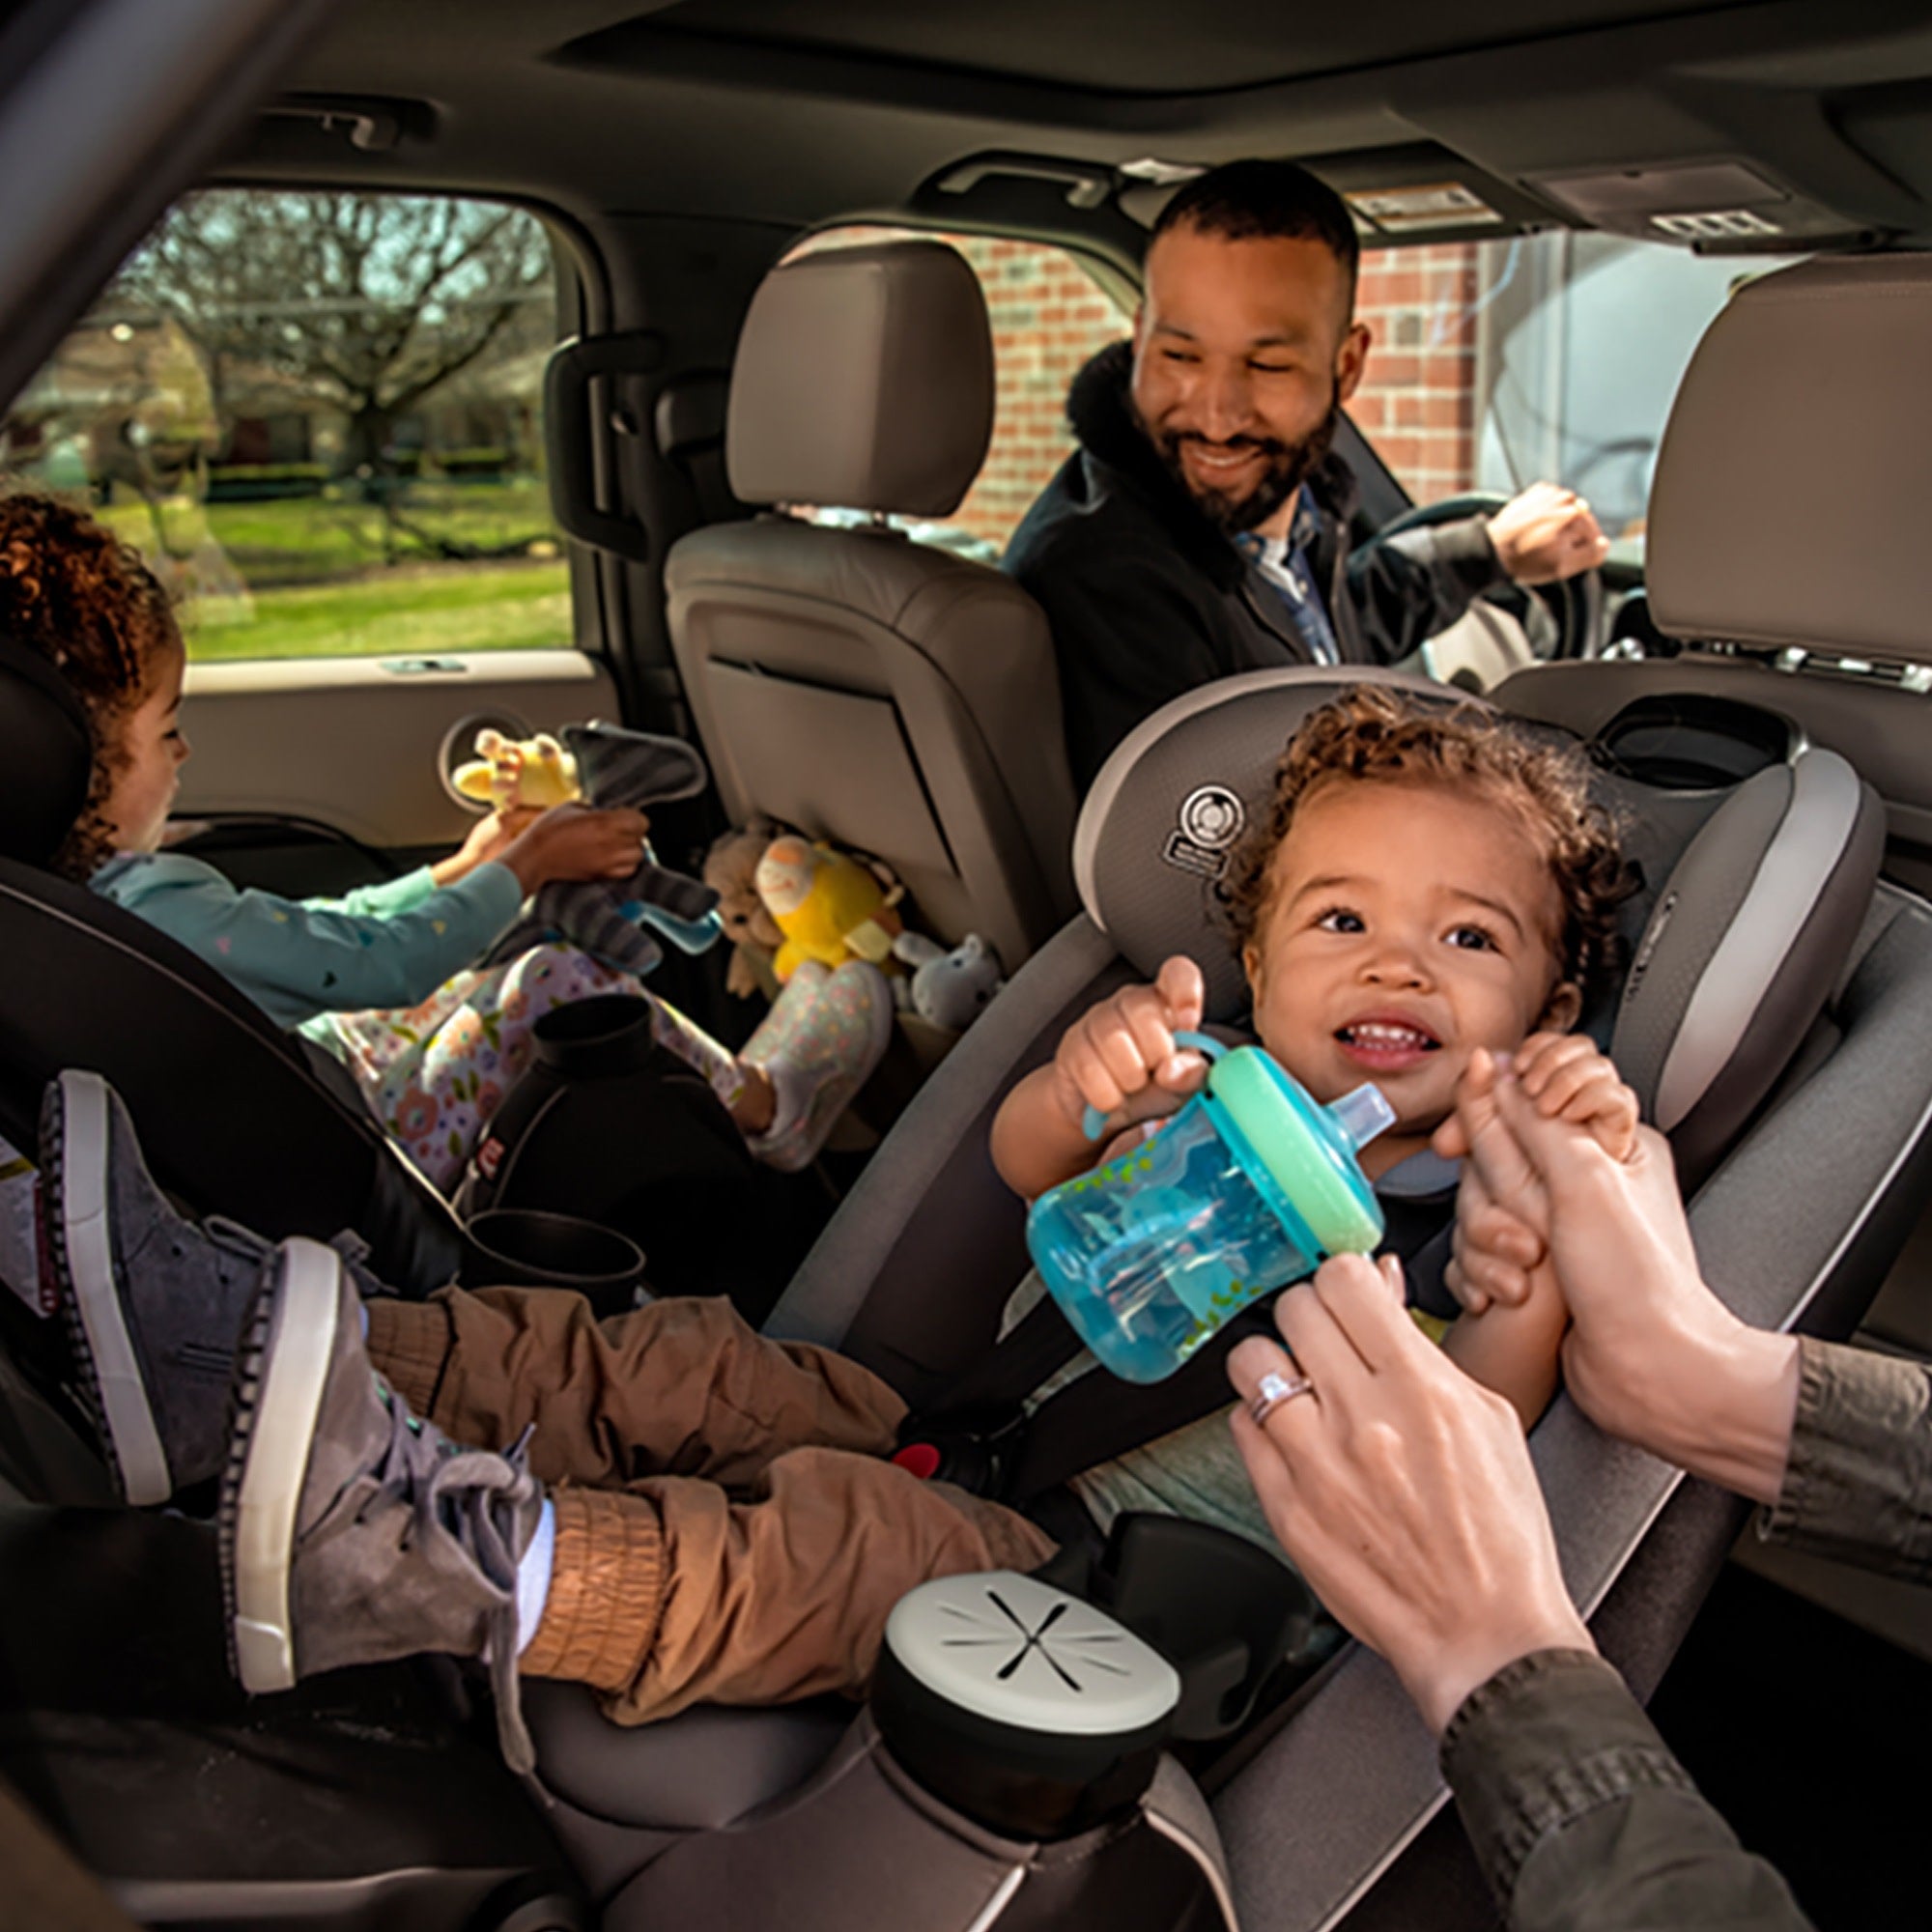 Grow and Go™ Extend 'n Ride LX - the car seat built to GROW - for extended use through 3 stages